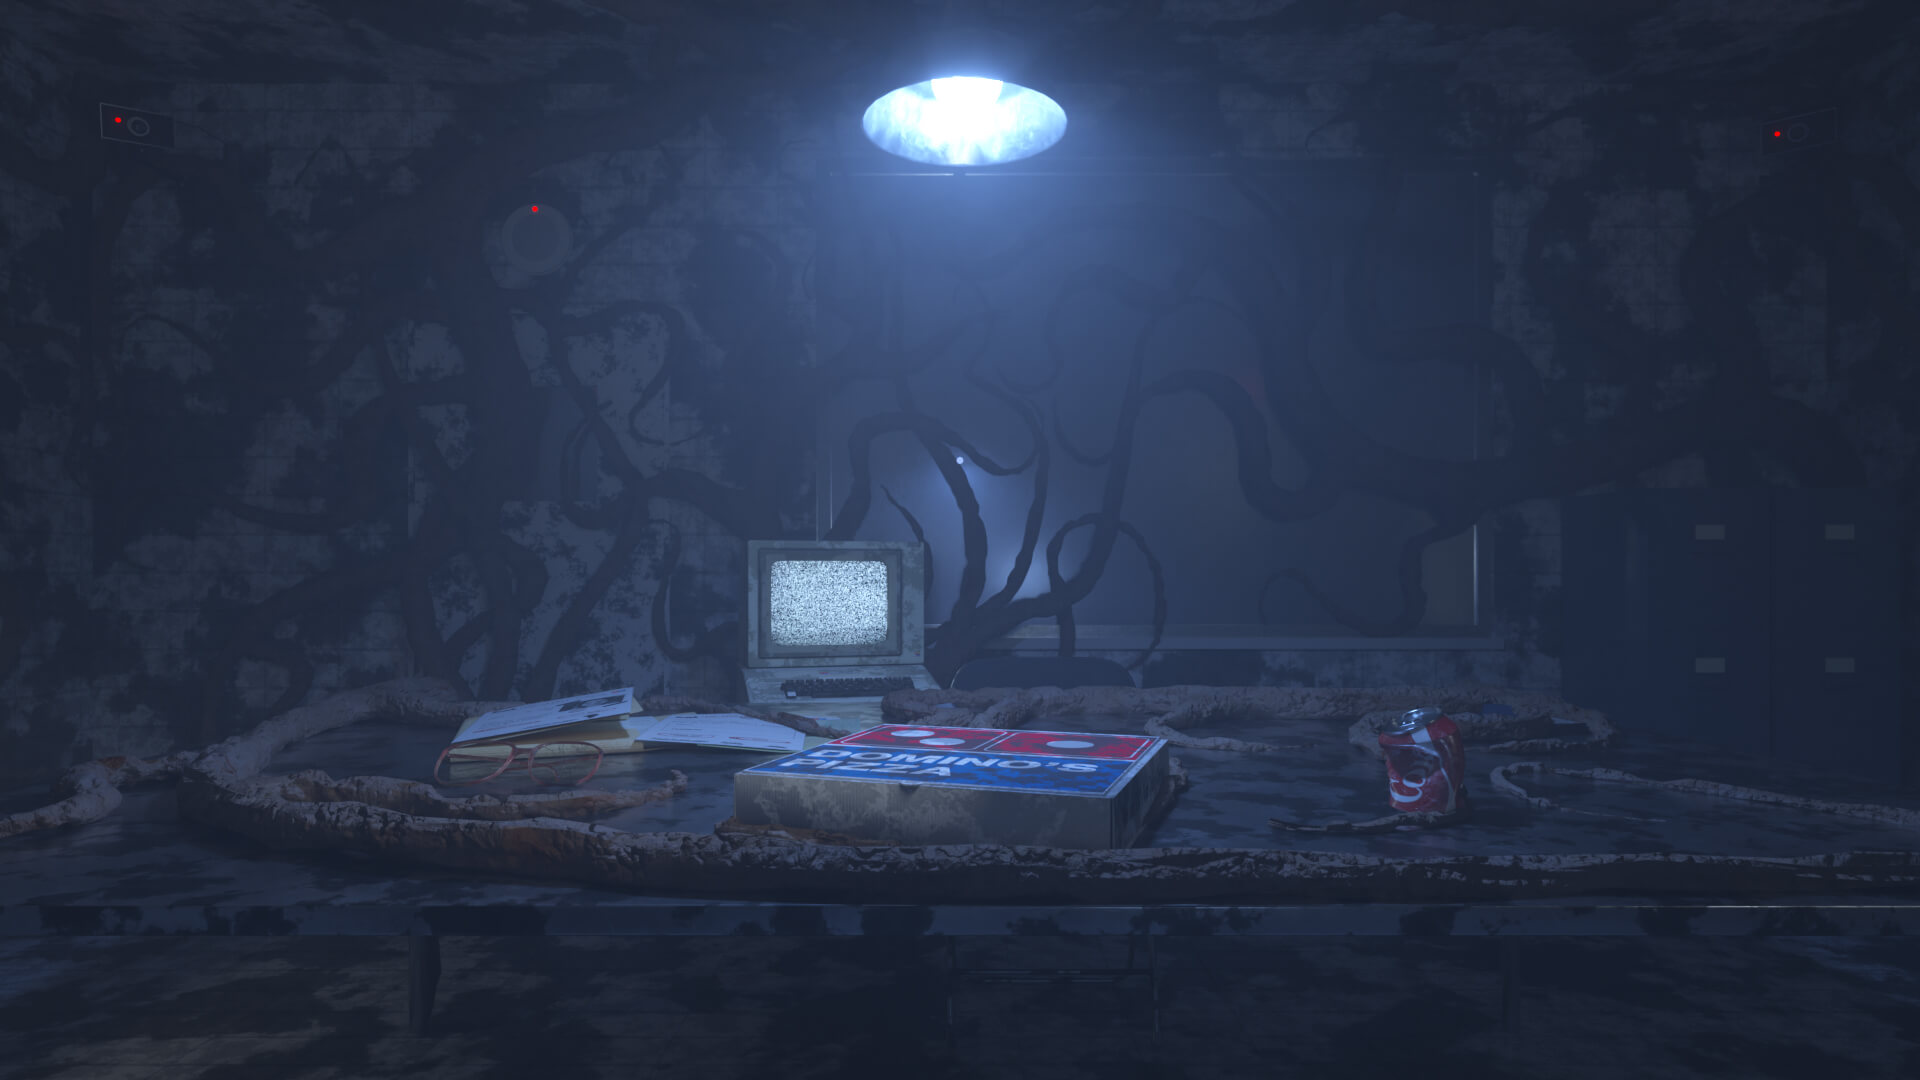 Laboratory scene, in the Upside Down featuring dark vines covering all the surfaces.